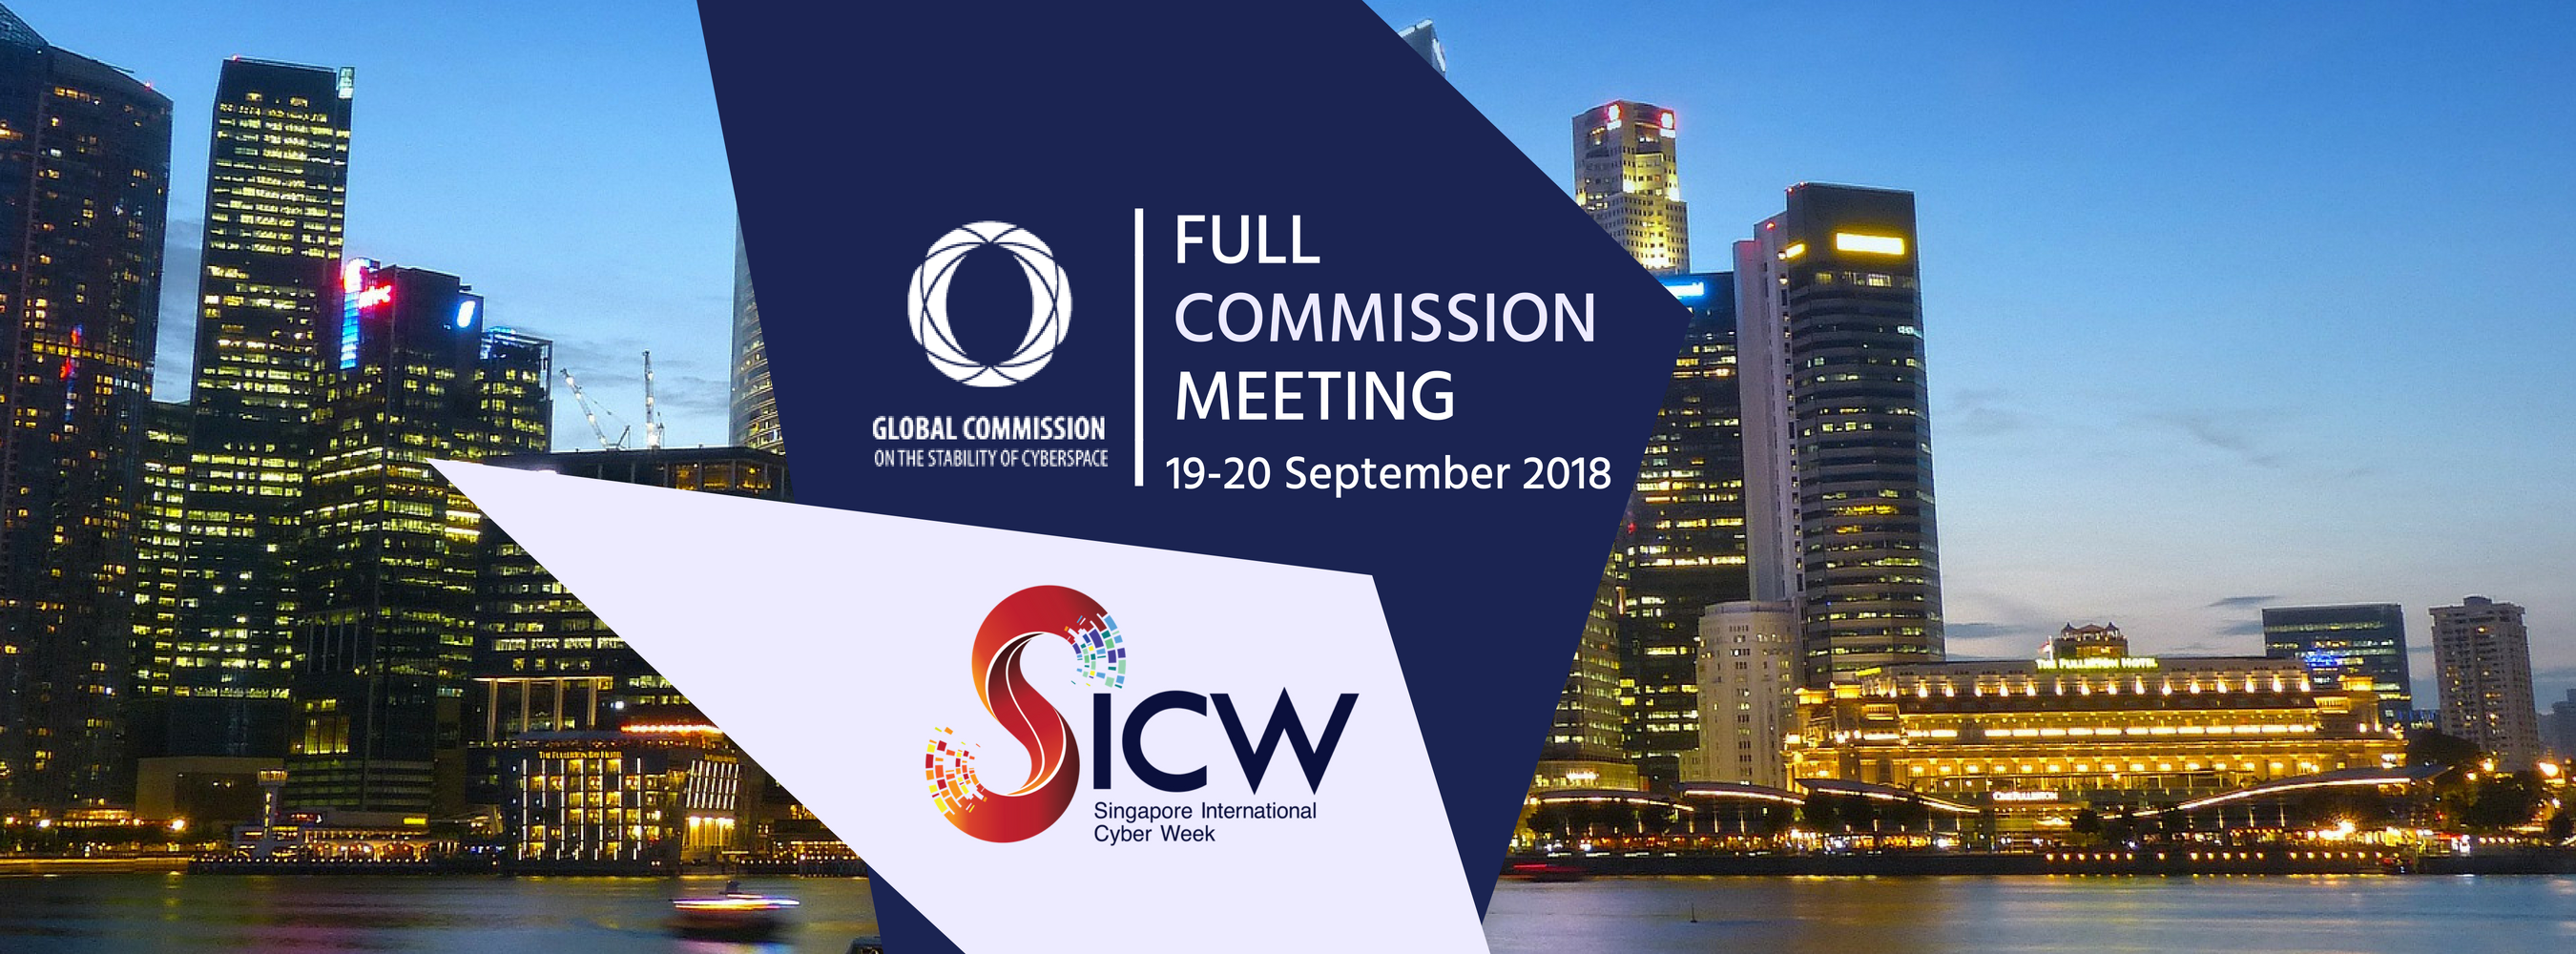 Global Commission on the Stability of Cyberspace in Singapore